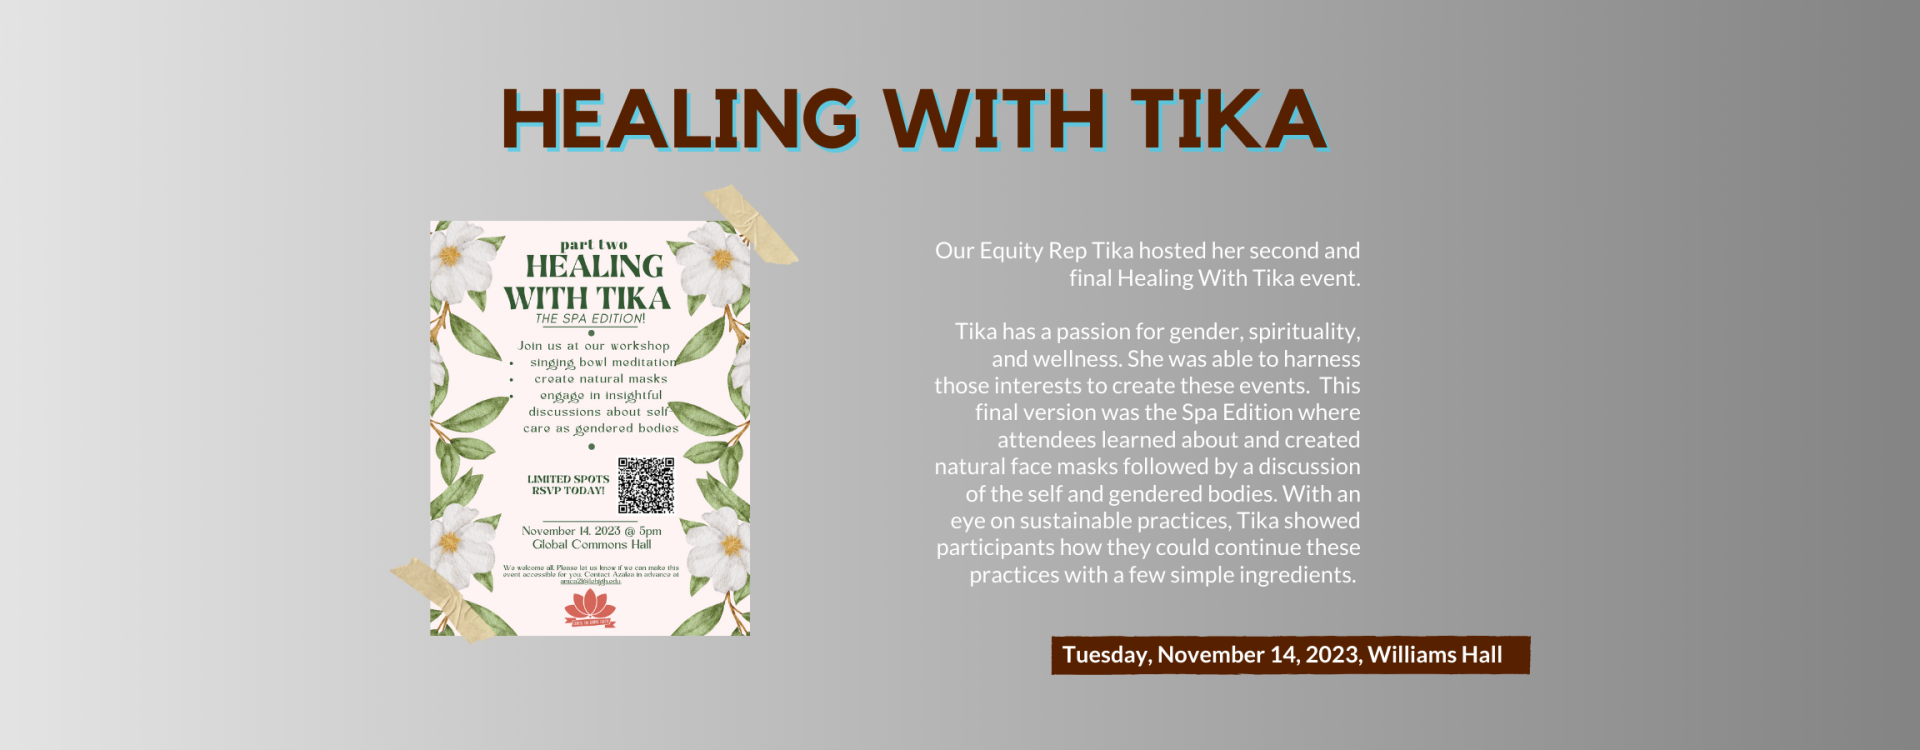 Heal with Tika: Our Equity Rep Tika hosted her second and final Healing With Tika event.  Tika has a passion for gender, spirituality, and wellness. She was able to harness those interests to create these events.  This final version was the Spa Edition where attendees learned about and created natural face masks followed by a discussion of the self and gendered bodies. With an eye on sustainable practices, Tika showed participants how they could continue these practices with a few simple ingredients. 